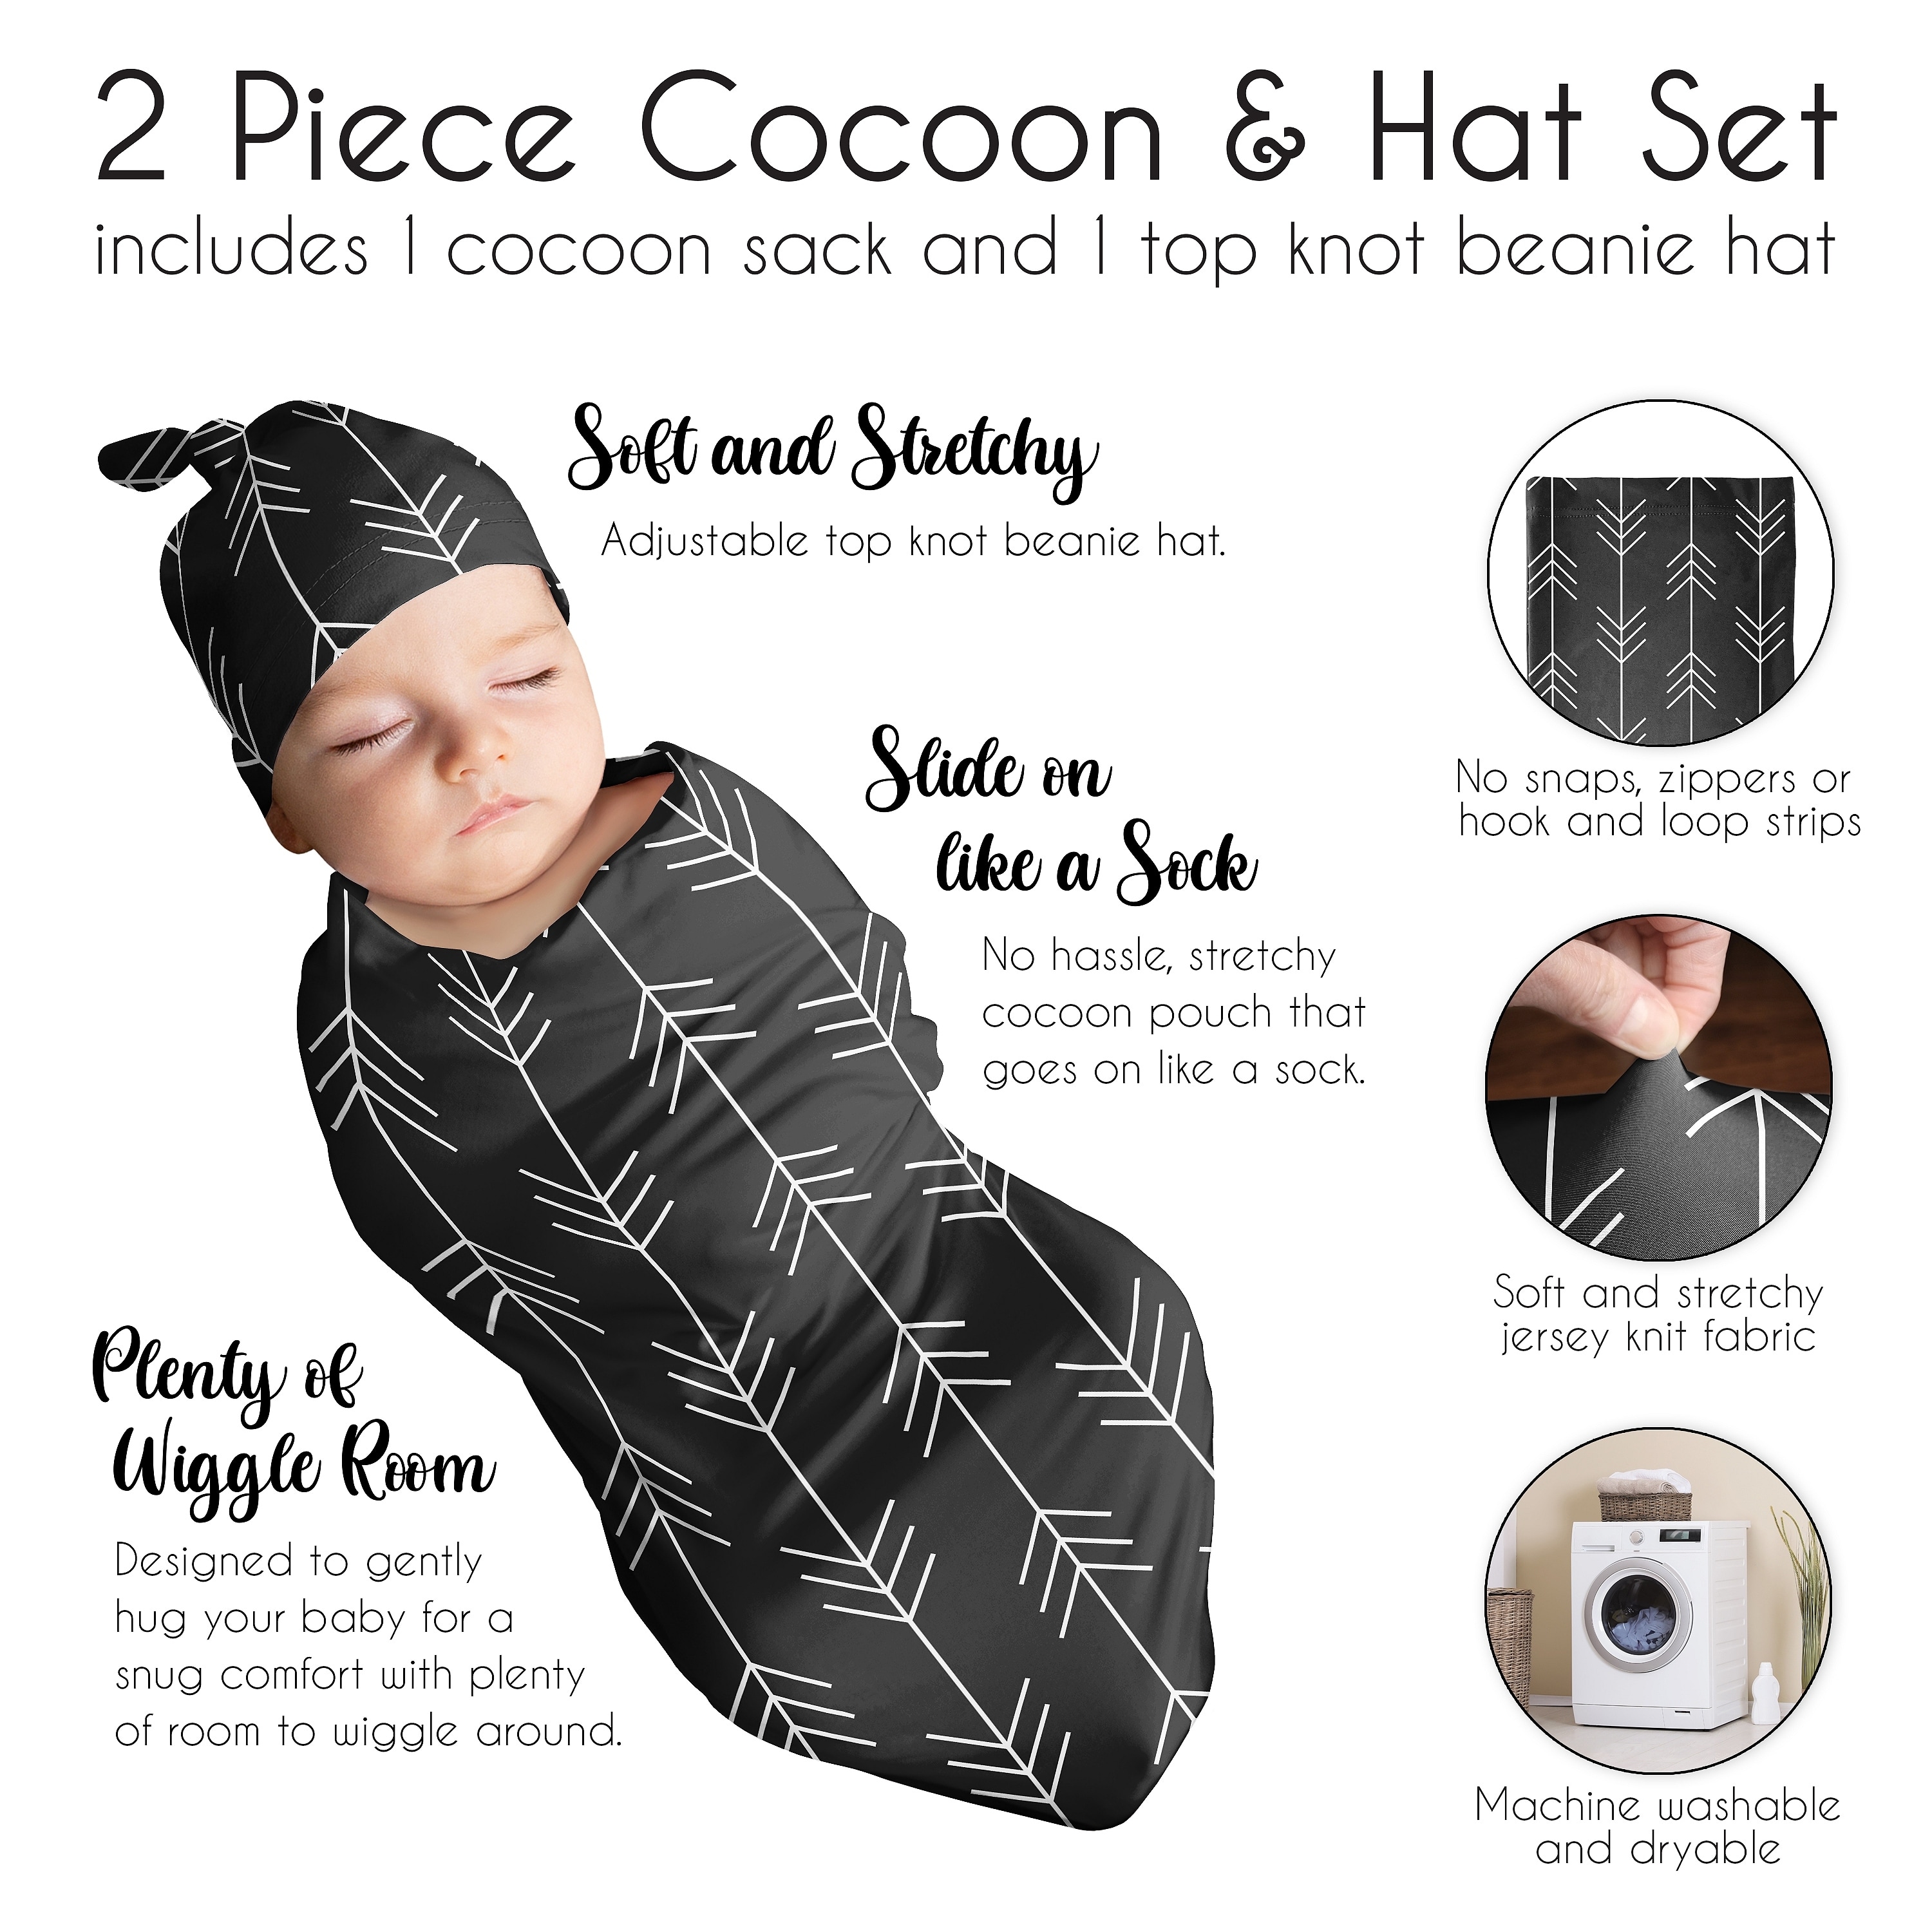 Black and White Woodland Arrow Baby Cocoon and Beanie Hat Sleep Sack 2pc Set White and Black Gender Neutral Forest Rustic Patch